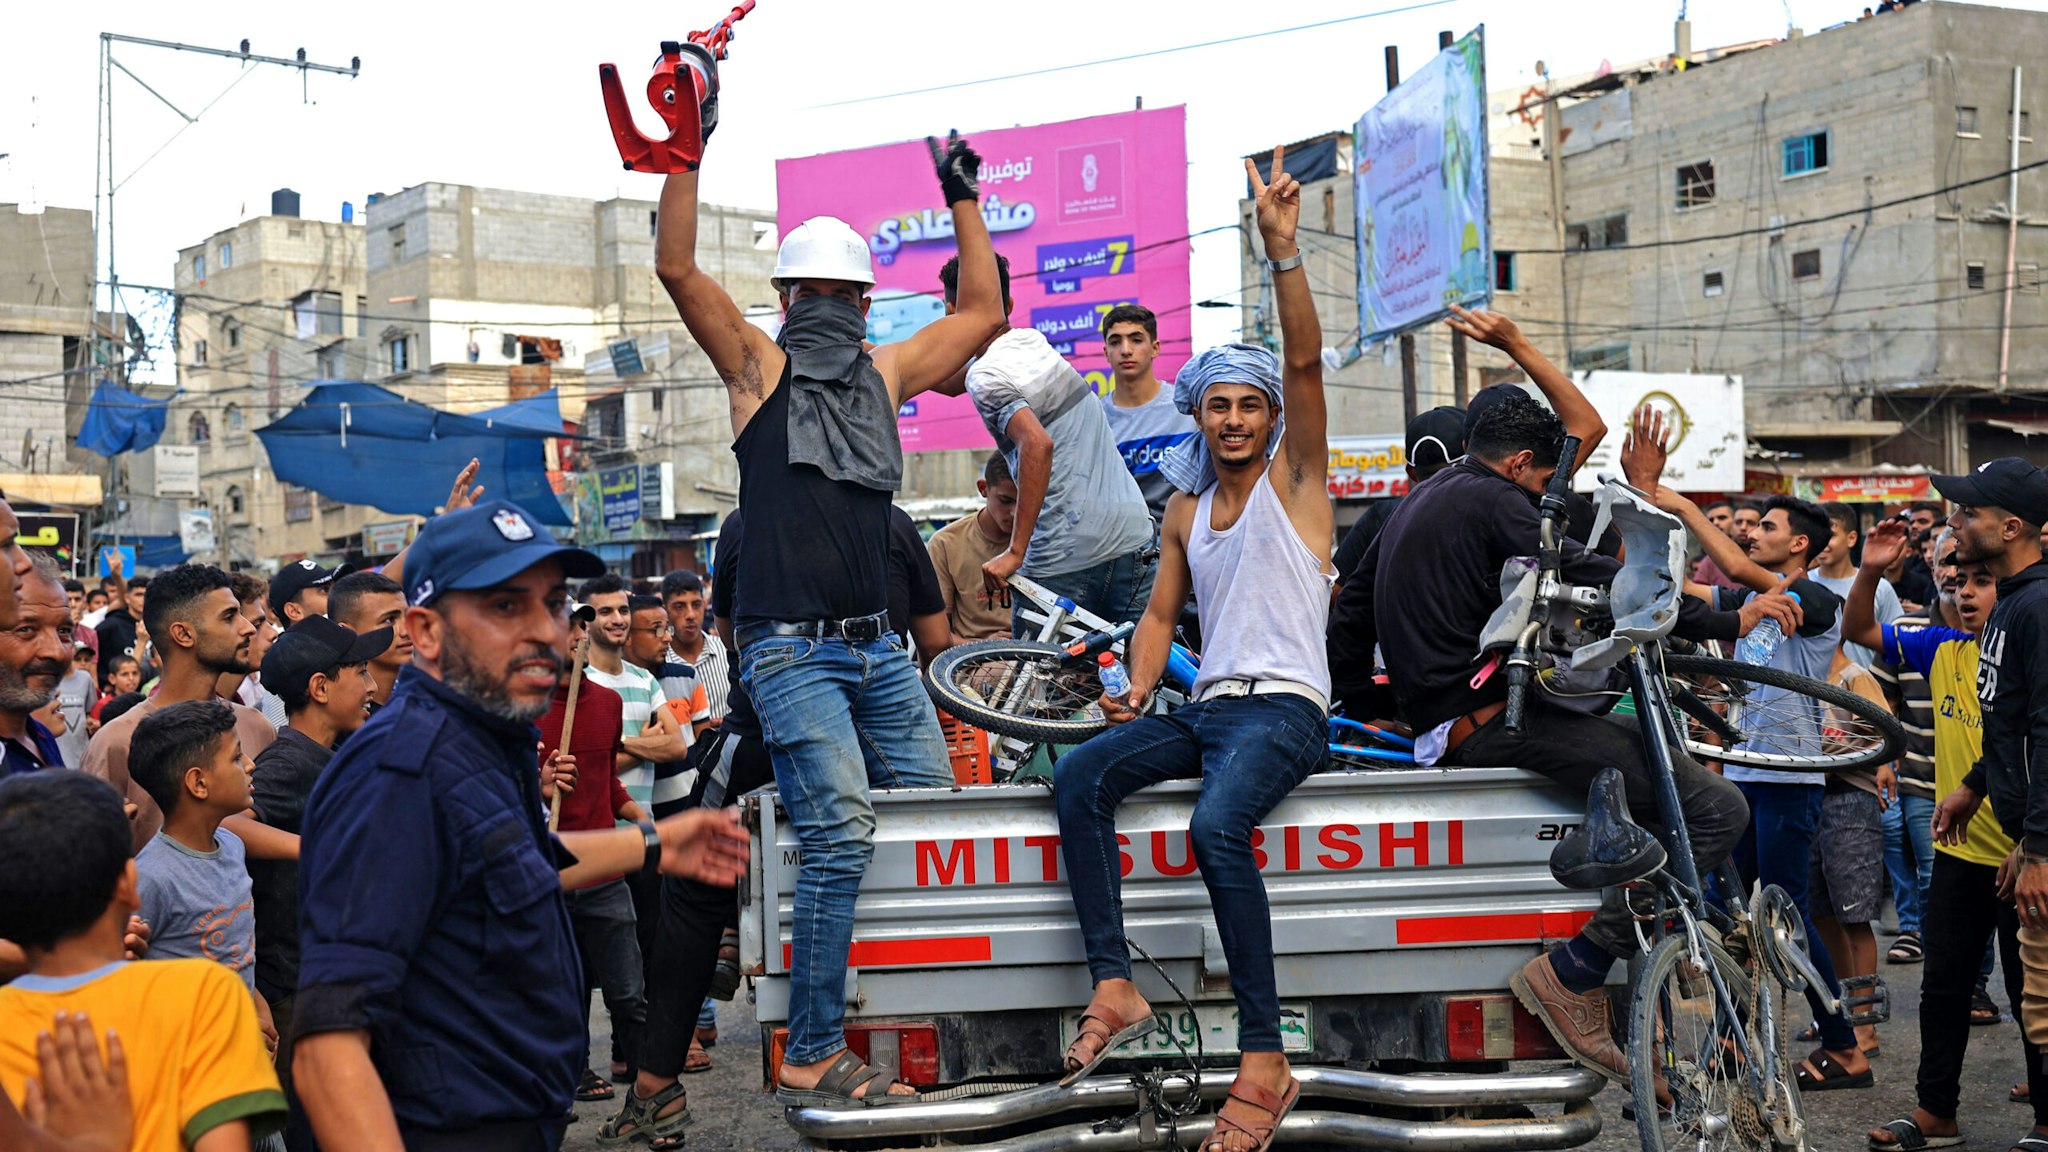 Palestinians celebrate their return after crossing the border fence with Israel from Khan Yunis in the southern Gaza Strip on October 7, 2023. Barrages of rockets were fired at Israel from the Gaza Strip at dawn as militants from the blockaded Palestinian enclave infiltrated Israel, with at least one person killed, the army and medics said.